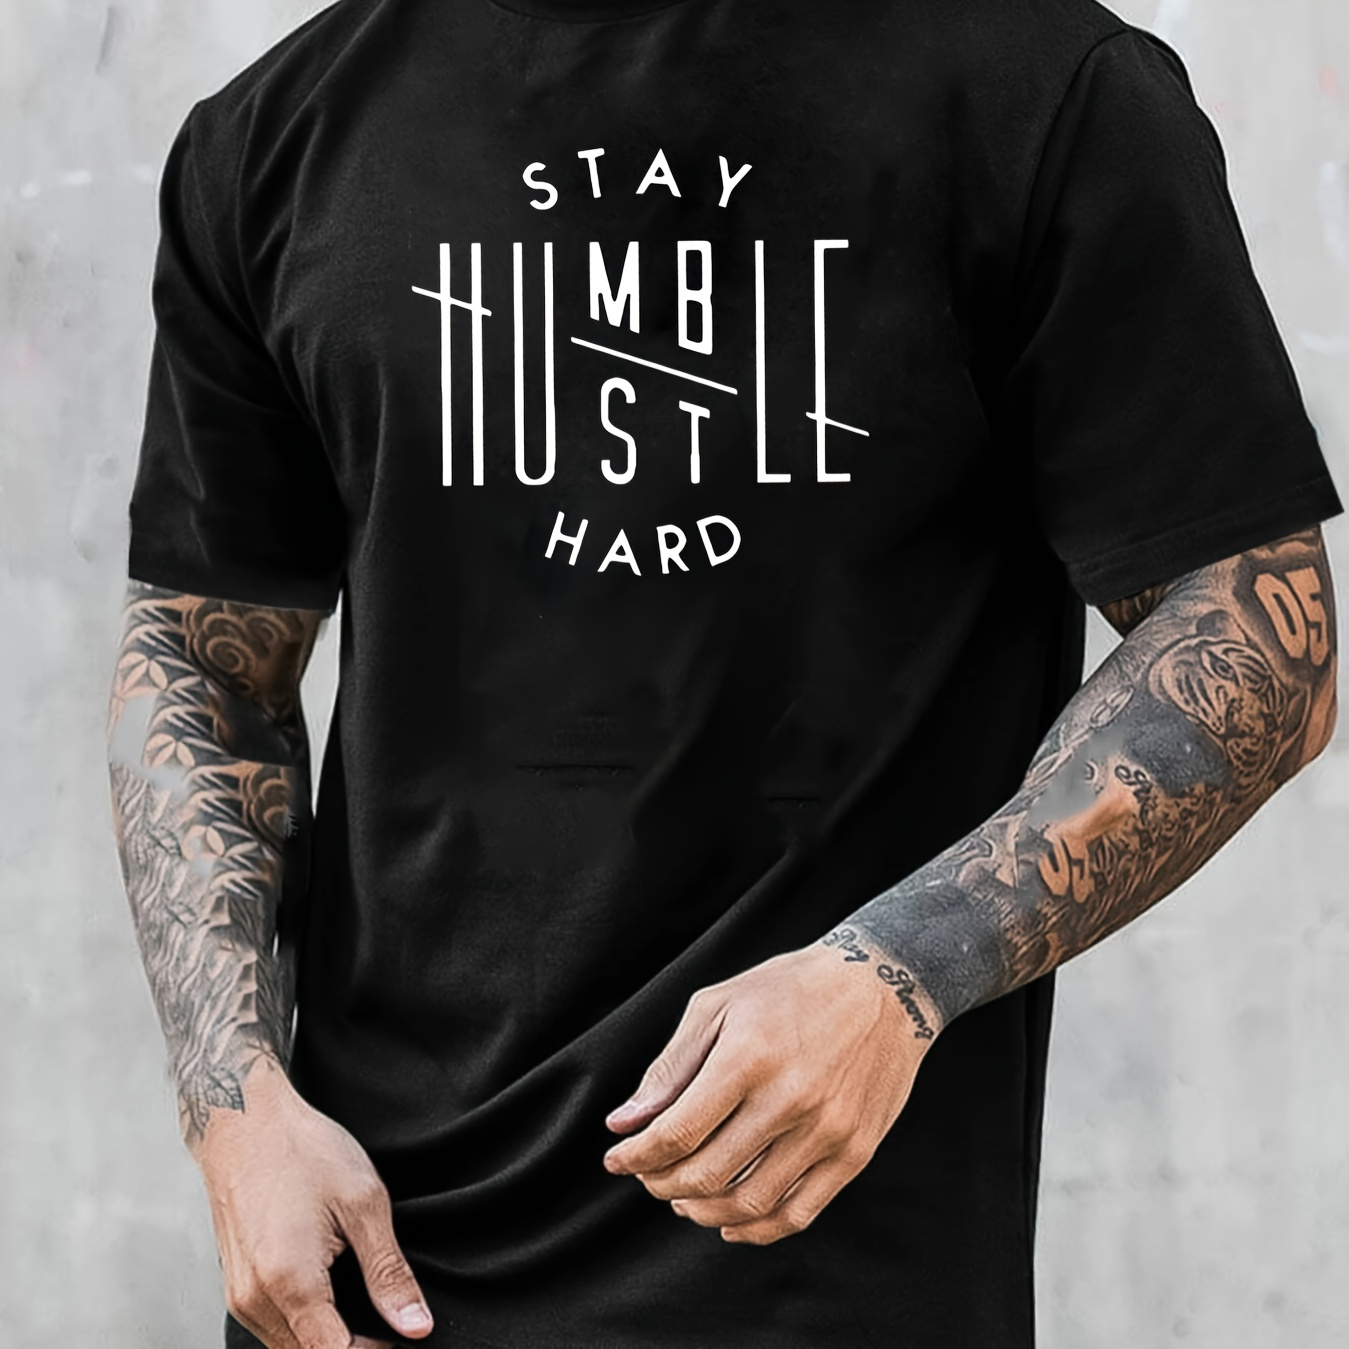 

Stay Humble Print Men's Short Sleeve T-shirts, Comfy Casual Breathable Tops For Men's Fitness Training, Jogging, Men's Clothing